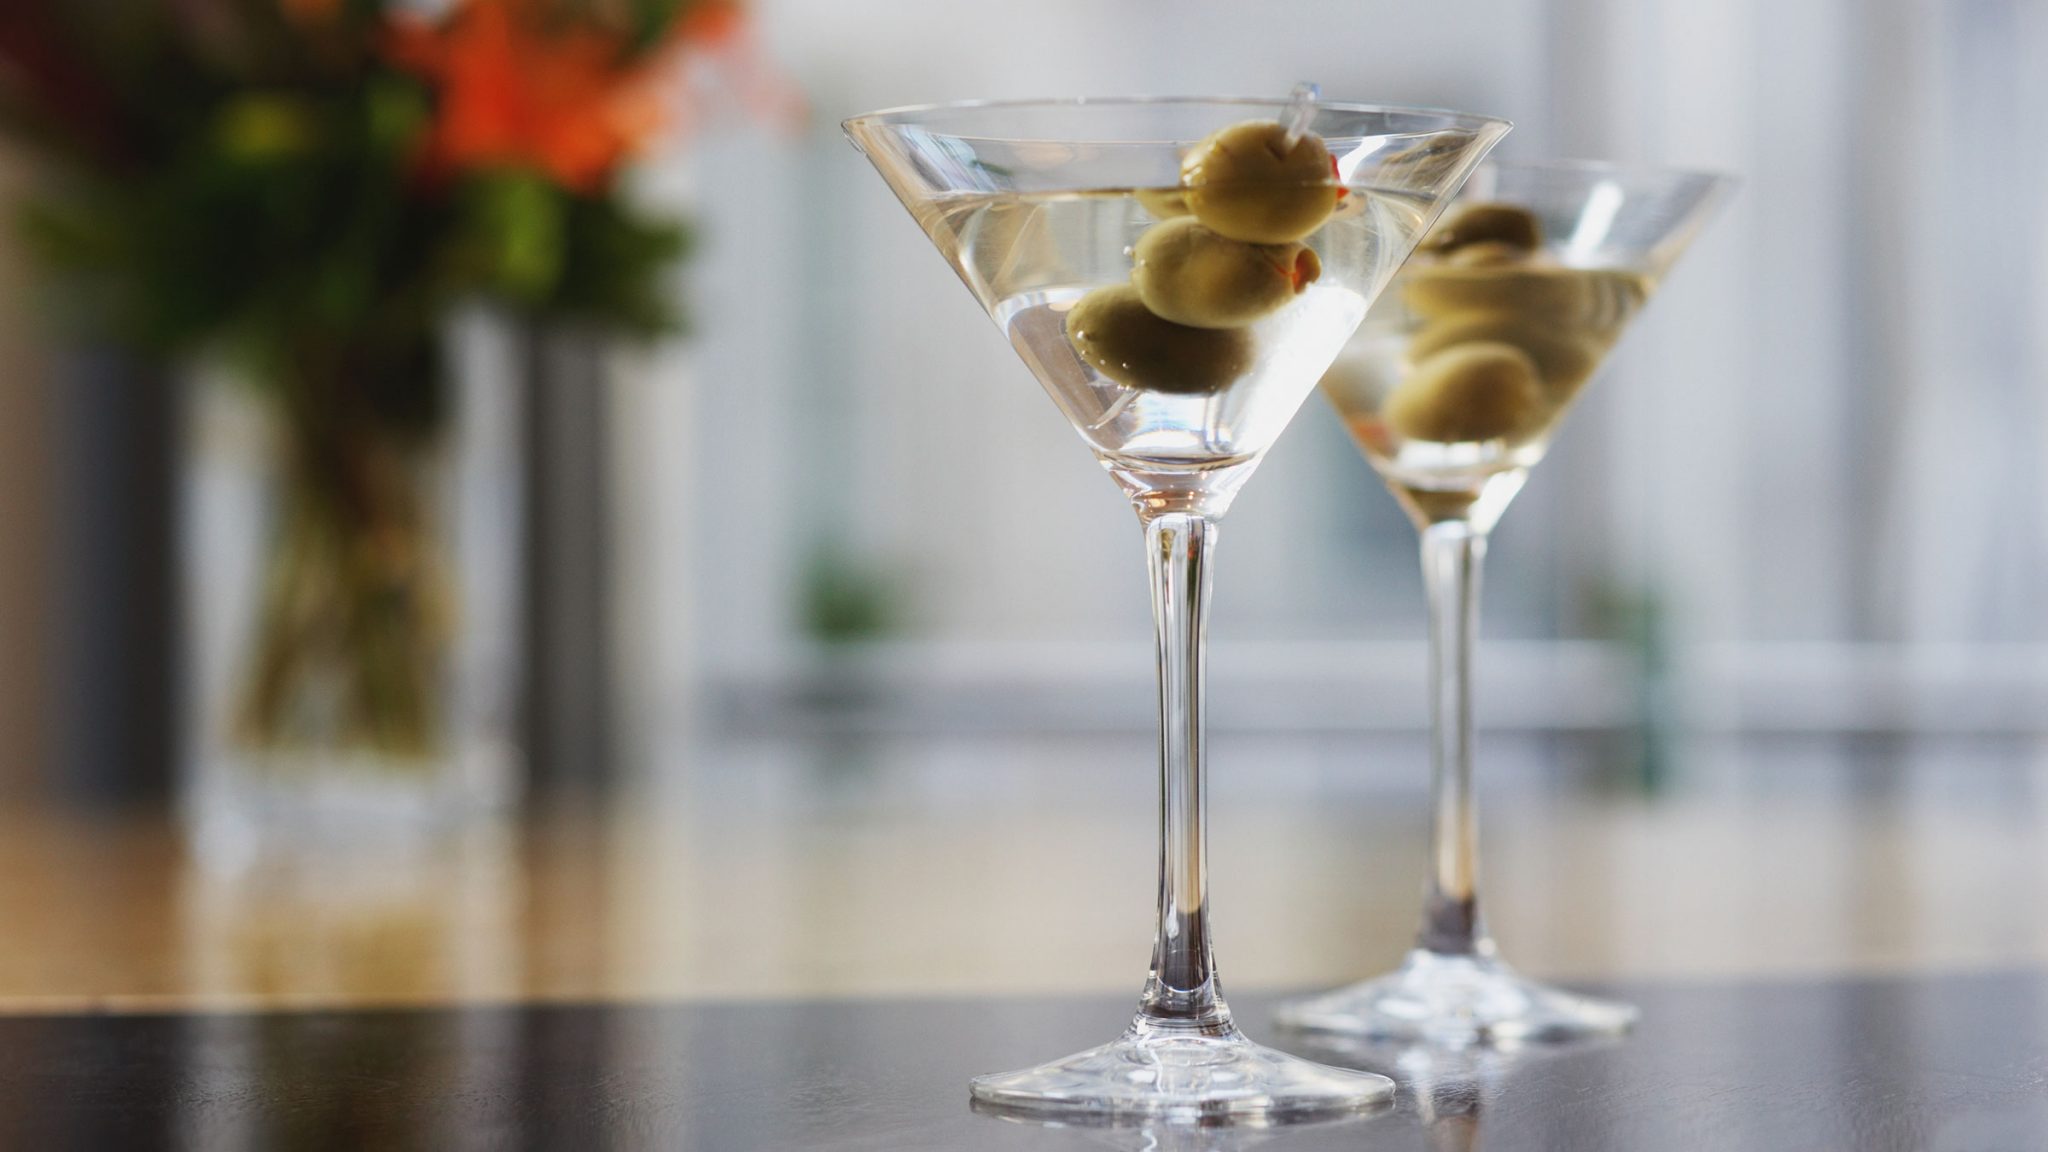 Classic martinis served at Le Bar at Four Seasons Hotel George V, Paris